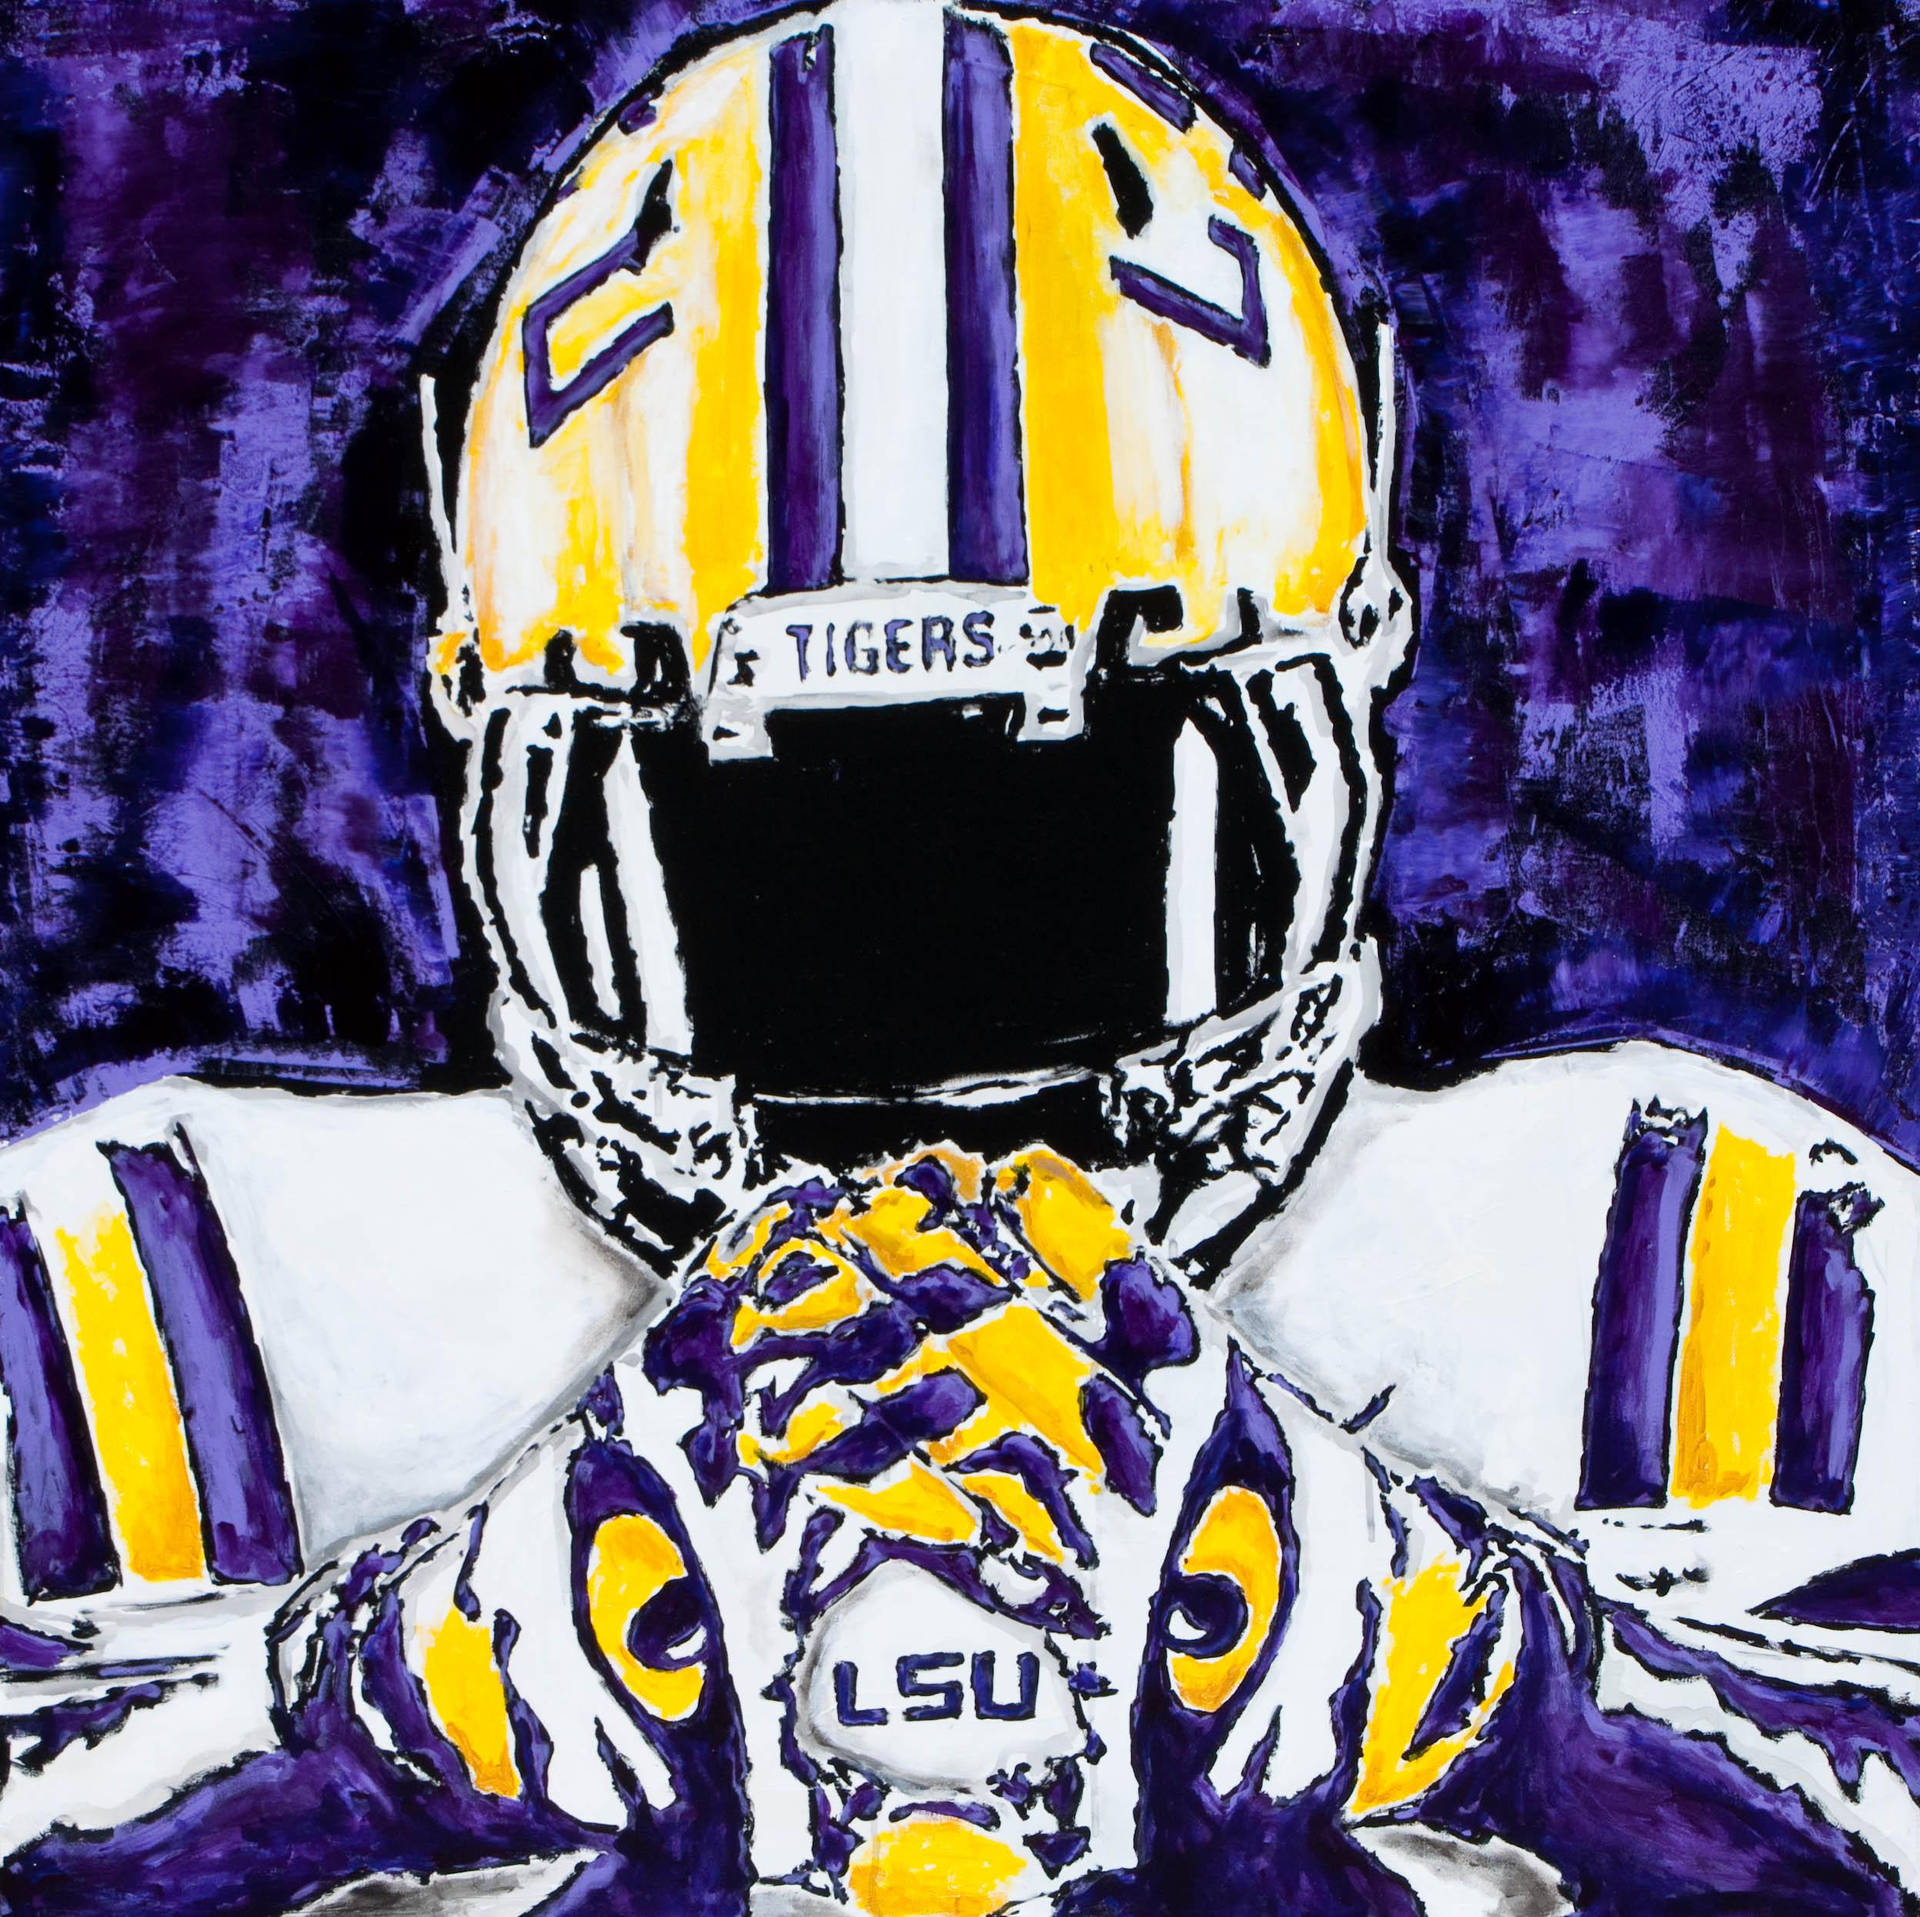 A Painting Of A Lsu Football Player Background